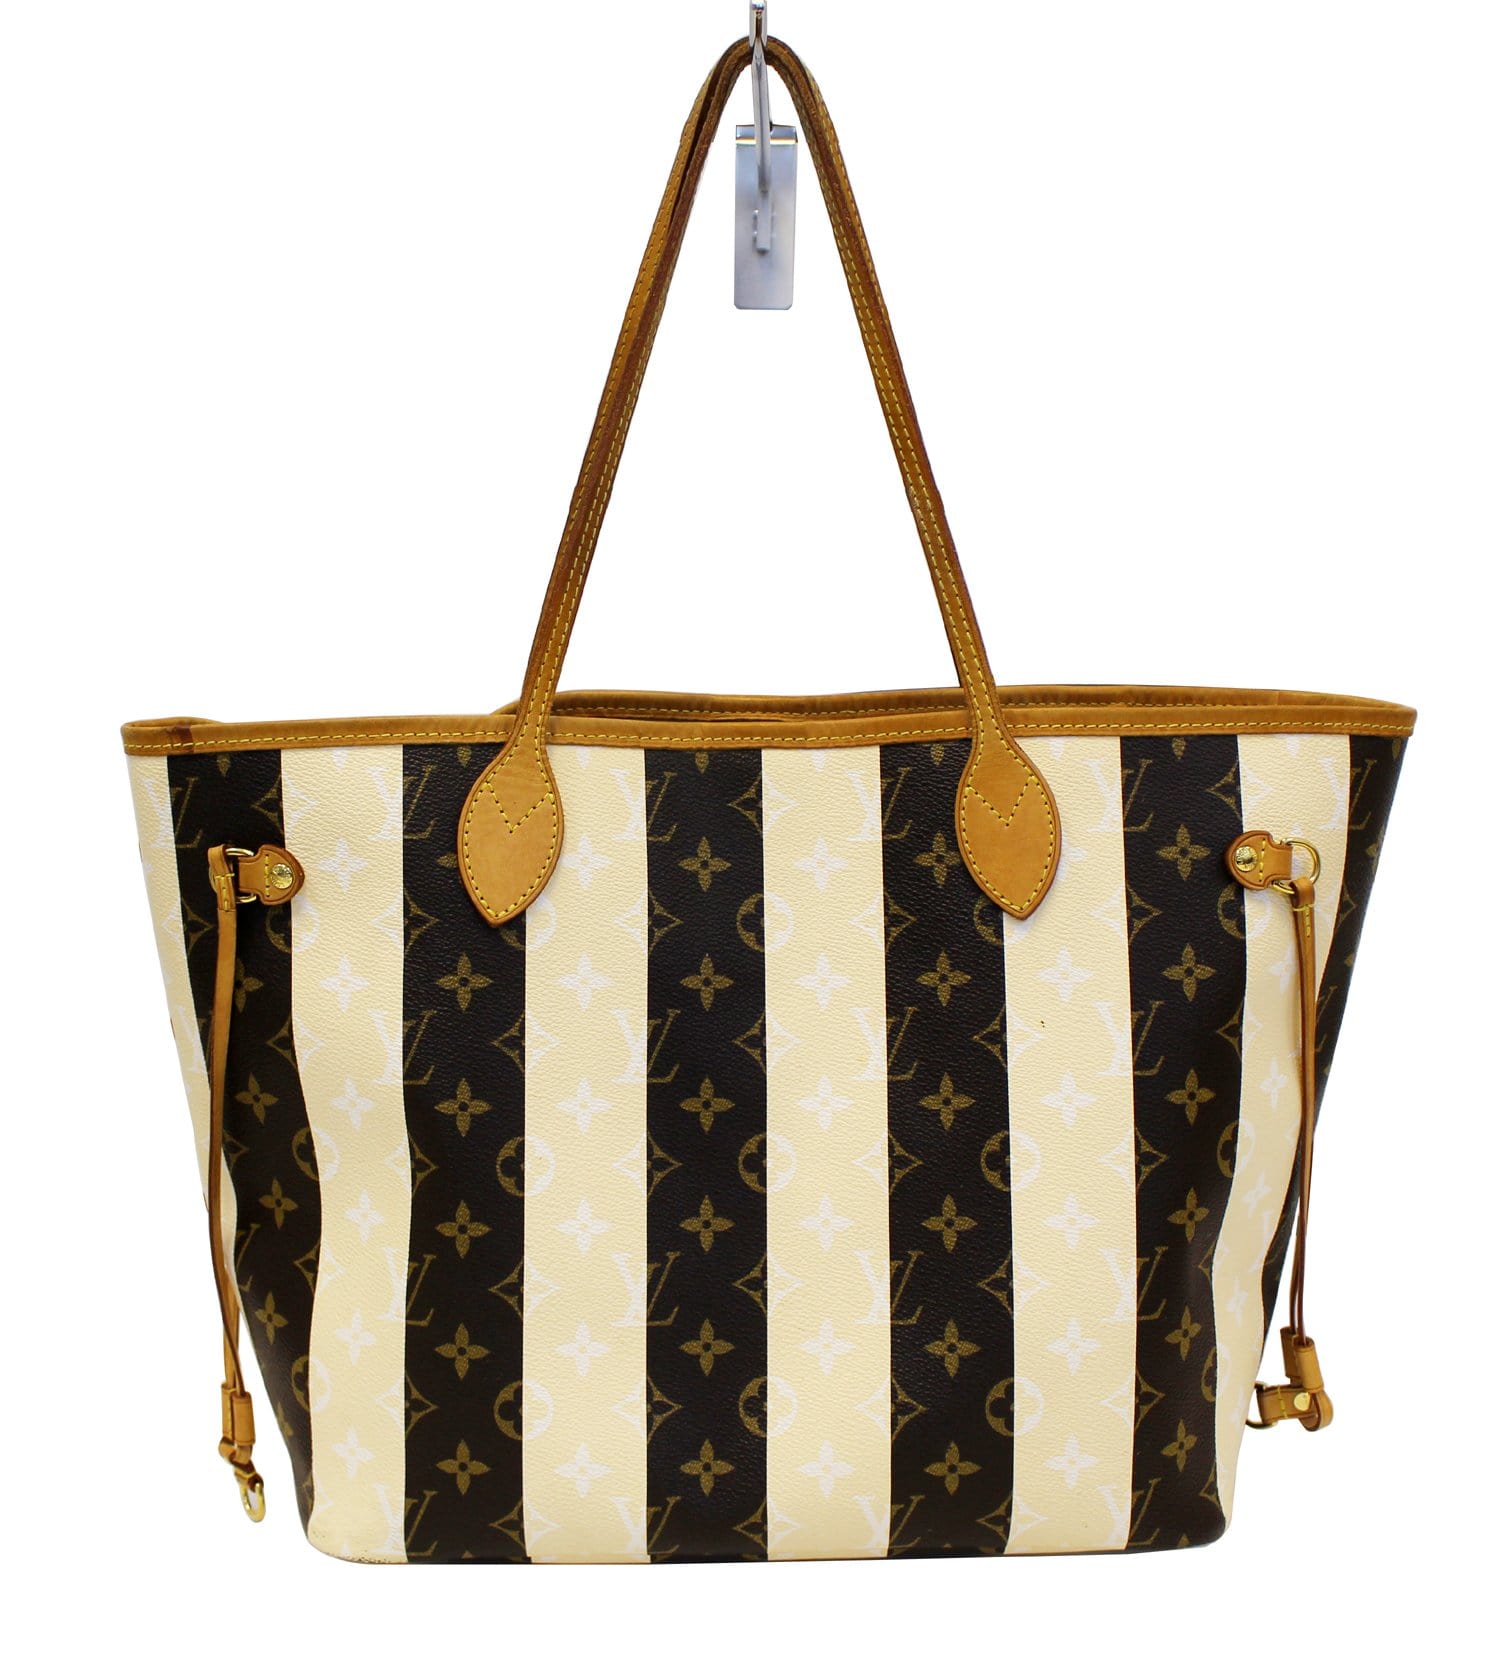 limited edition lv bags